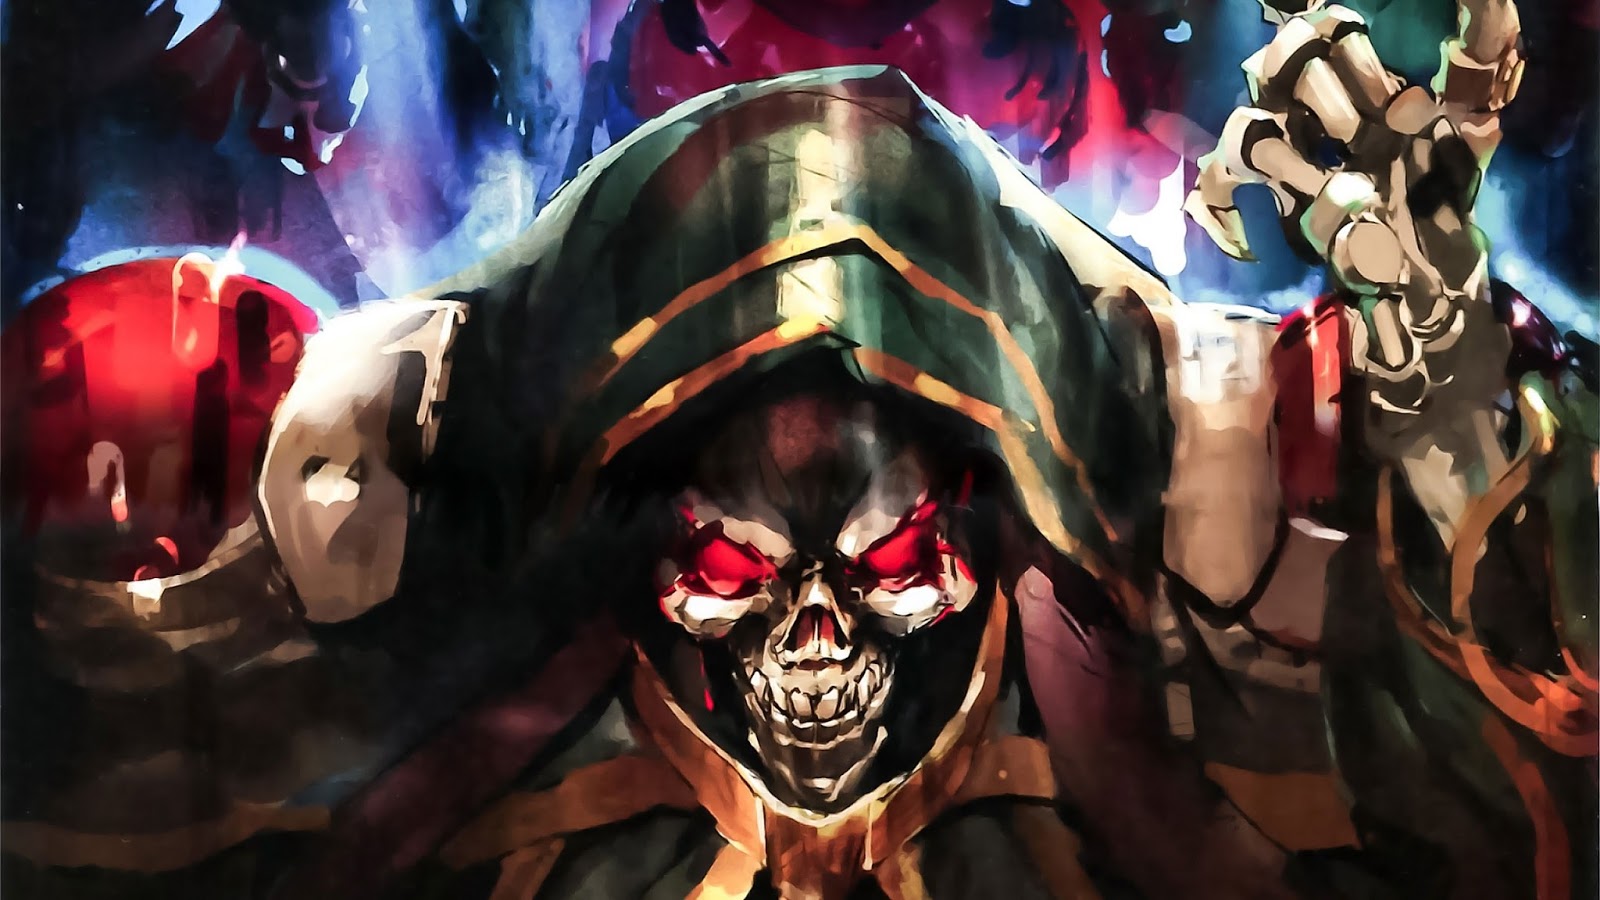 Overlord Season 4 Renewal, Announcement and Release Date Expectations